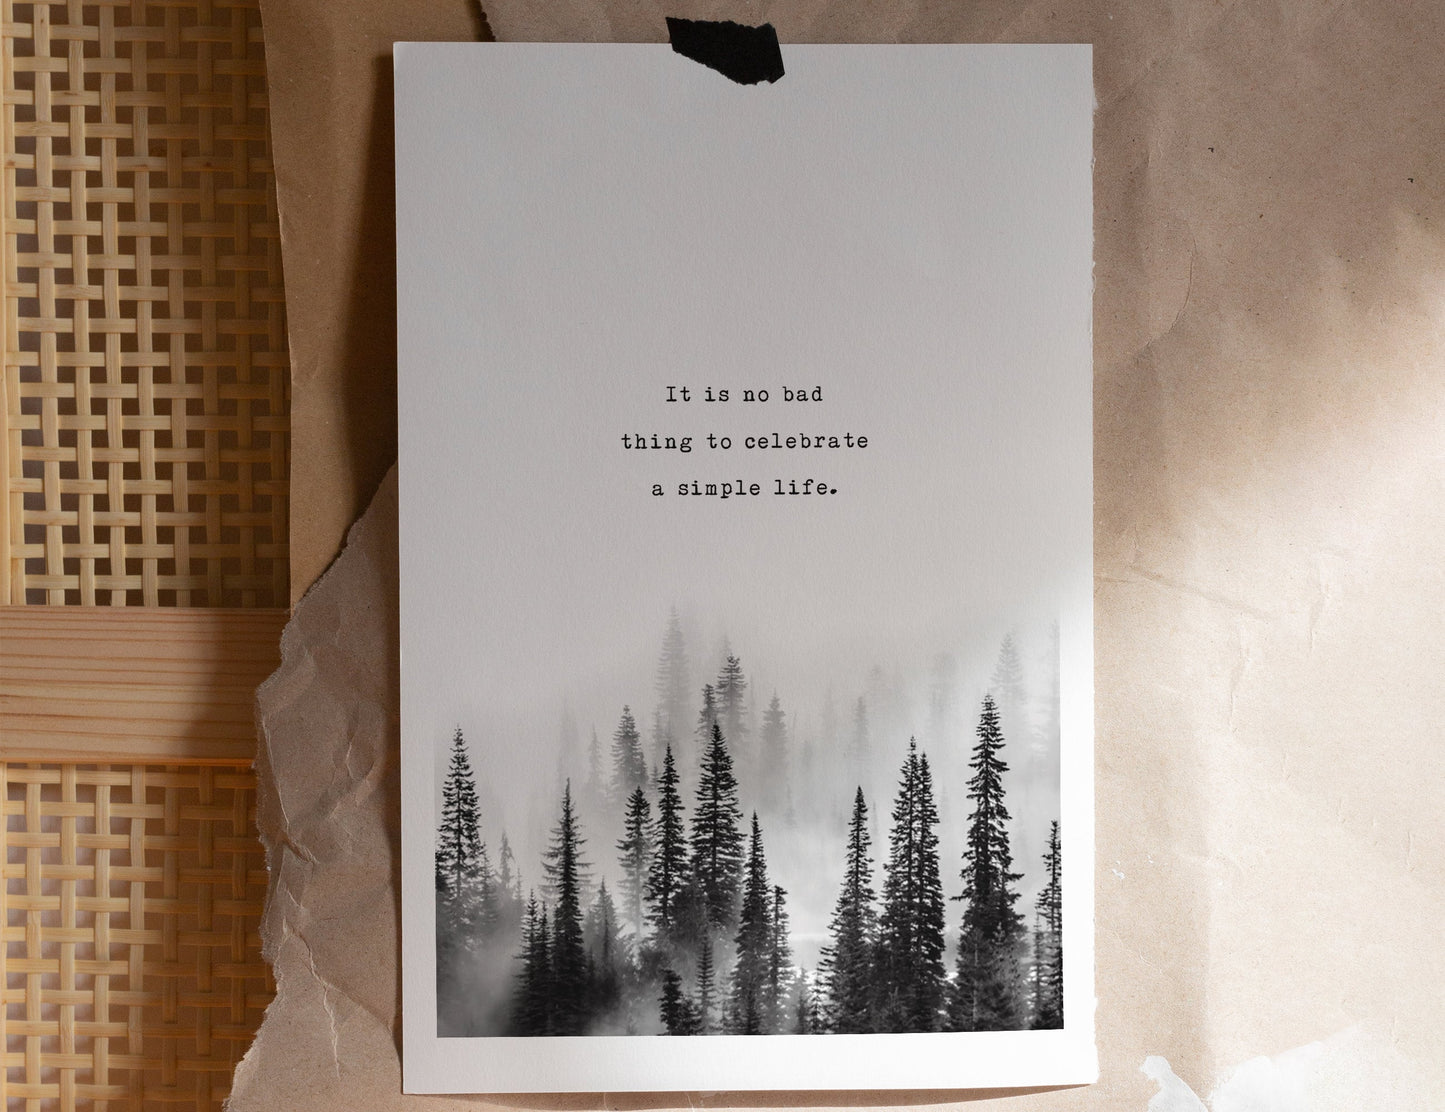 Quote print "It is no bad thing to celebrate a simple life"